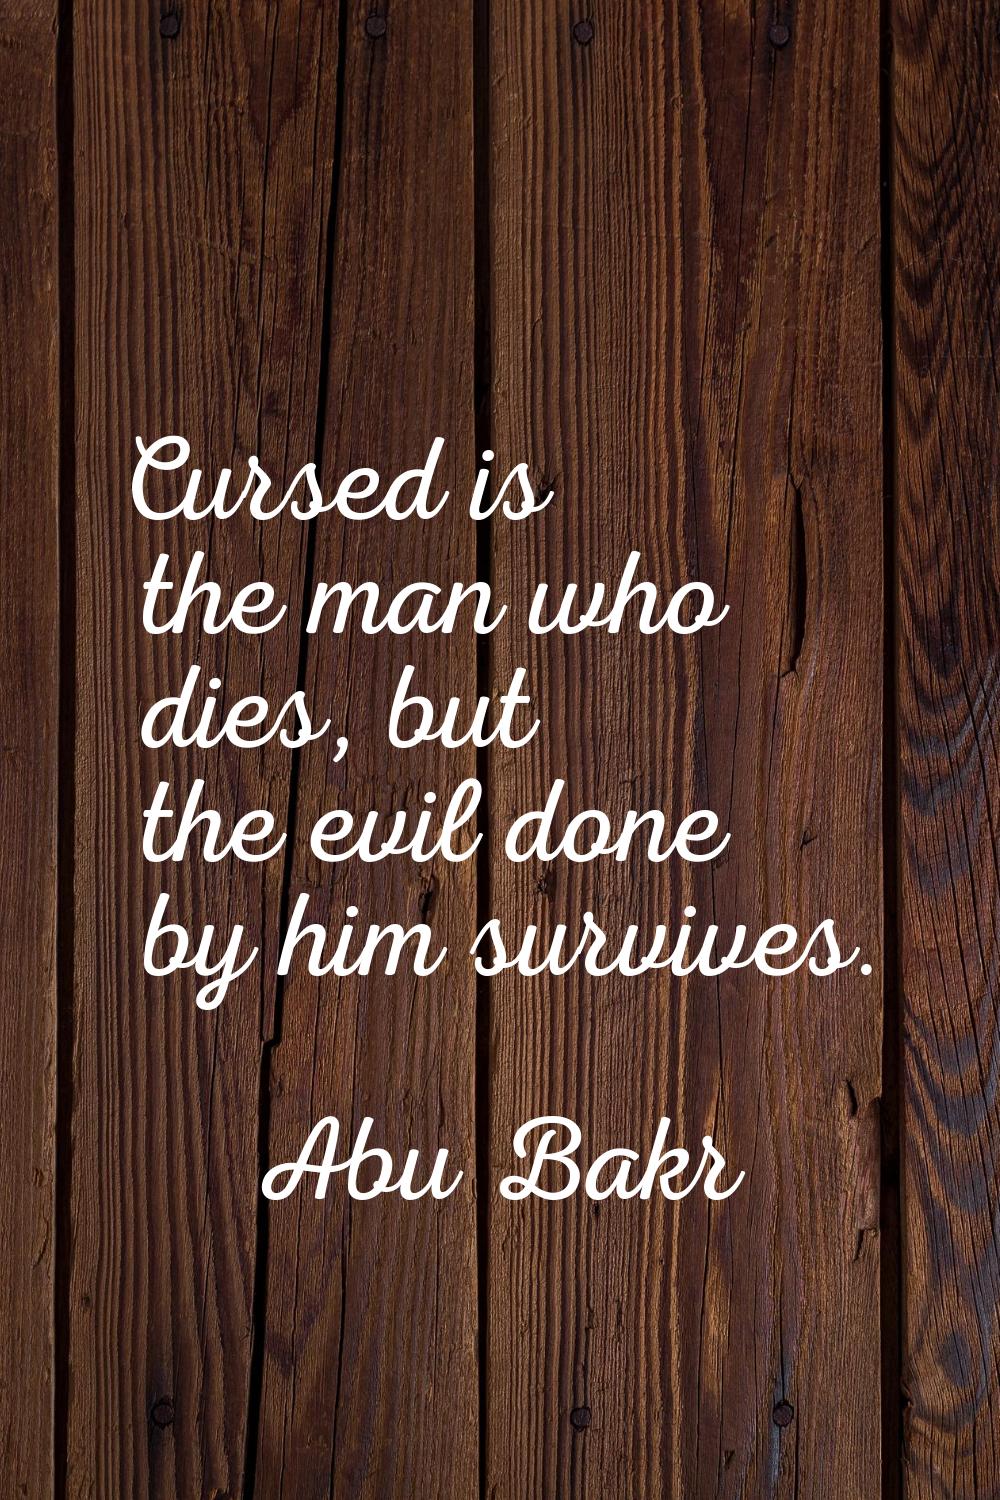 Cursed is the man who dies, but the evil done by him survives.